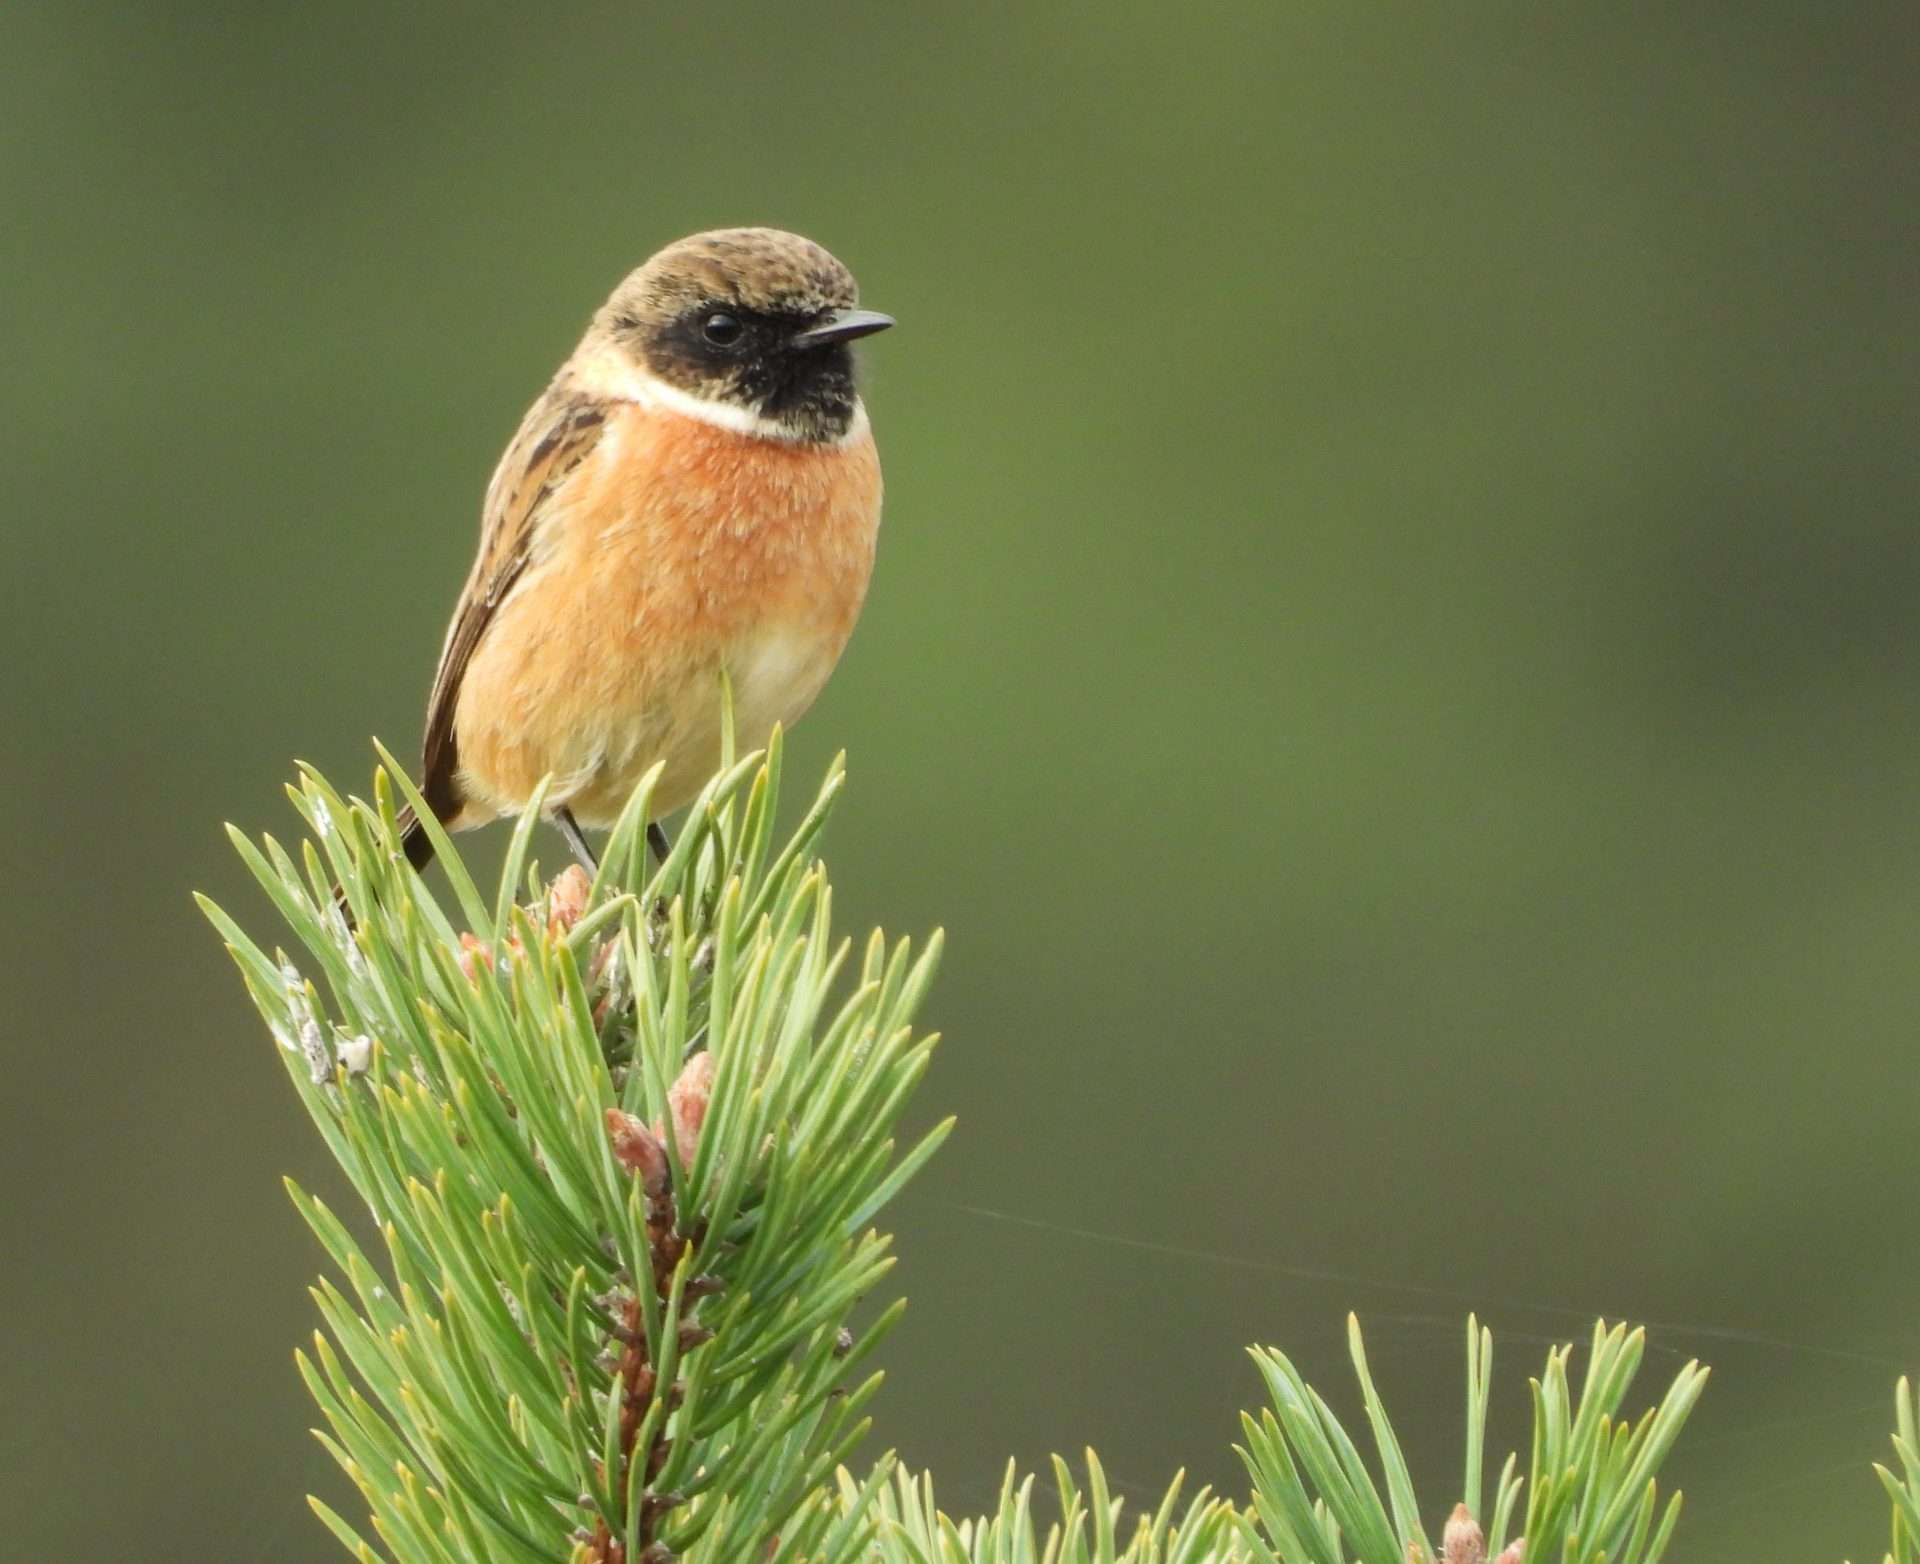 Stonechat by Kenneth Bradley at Ideford Common